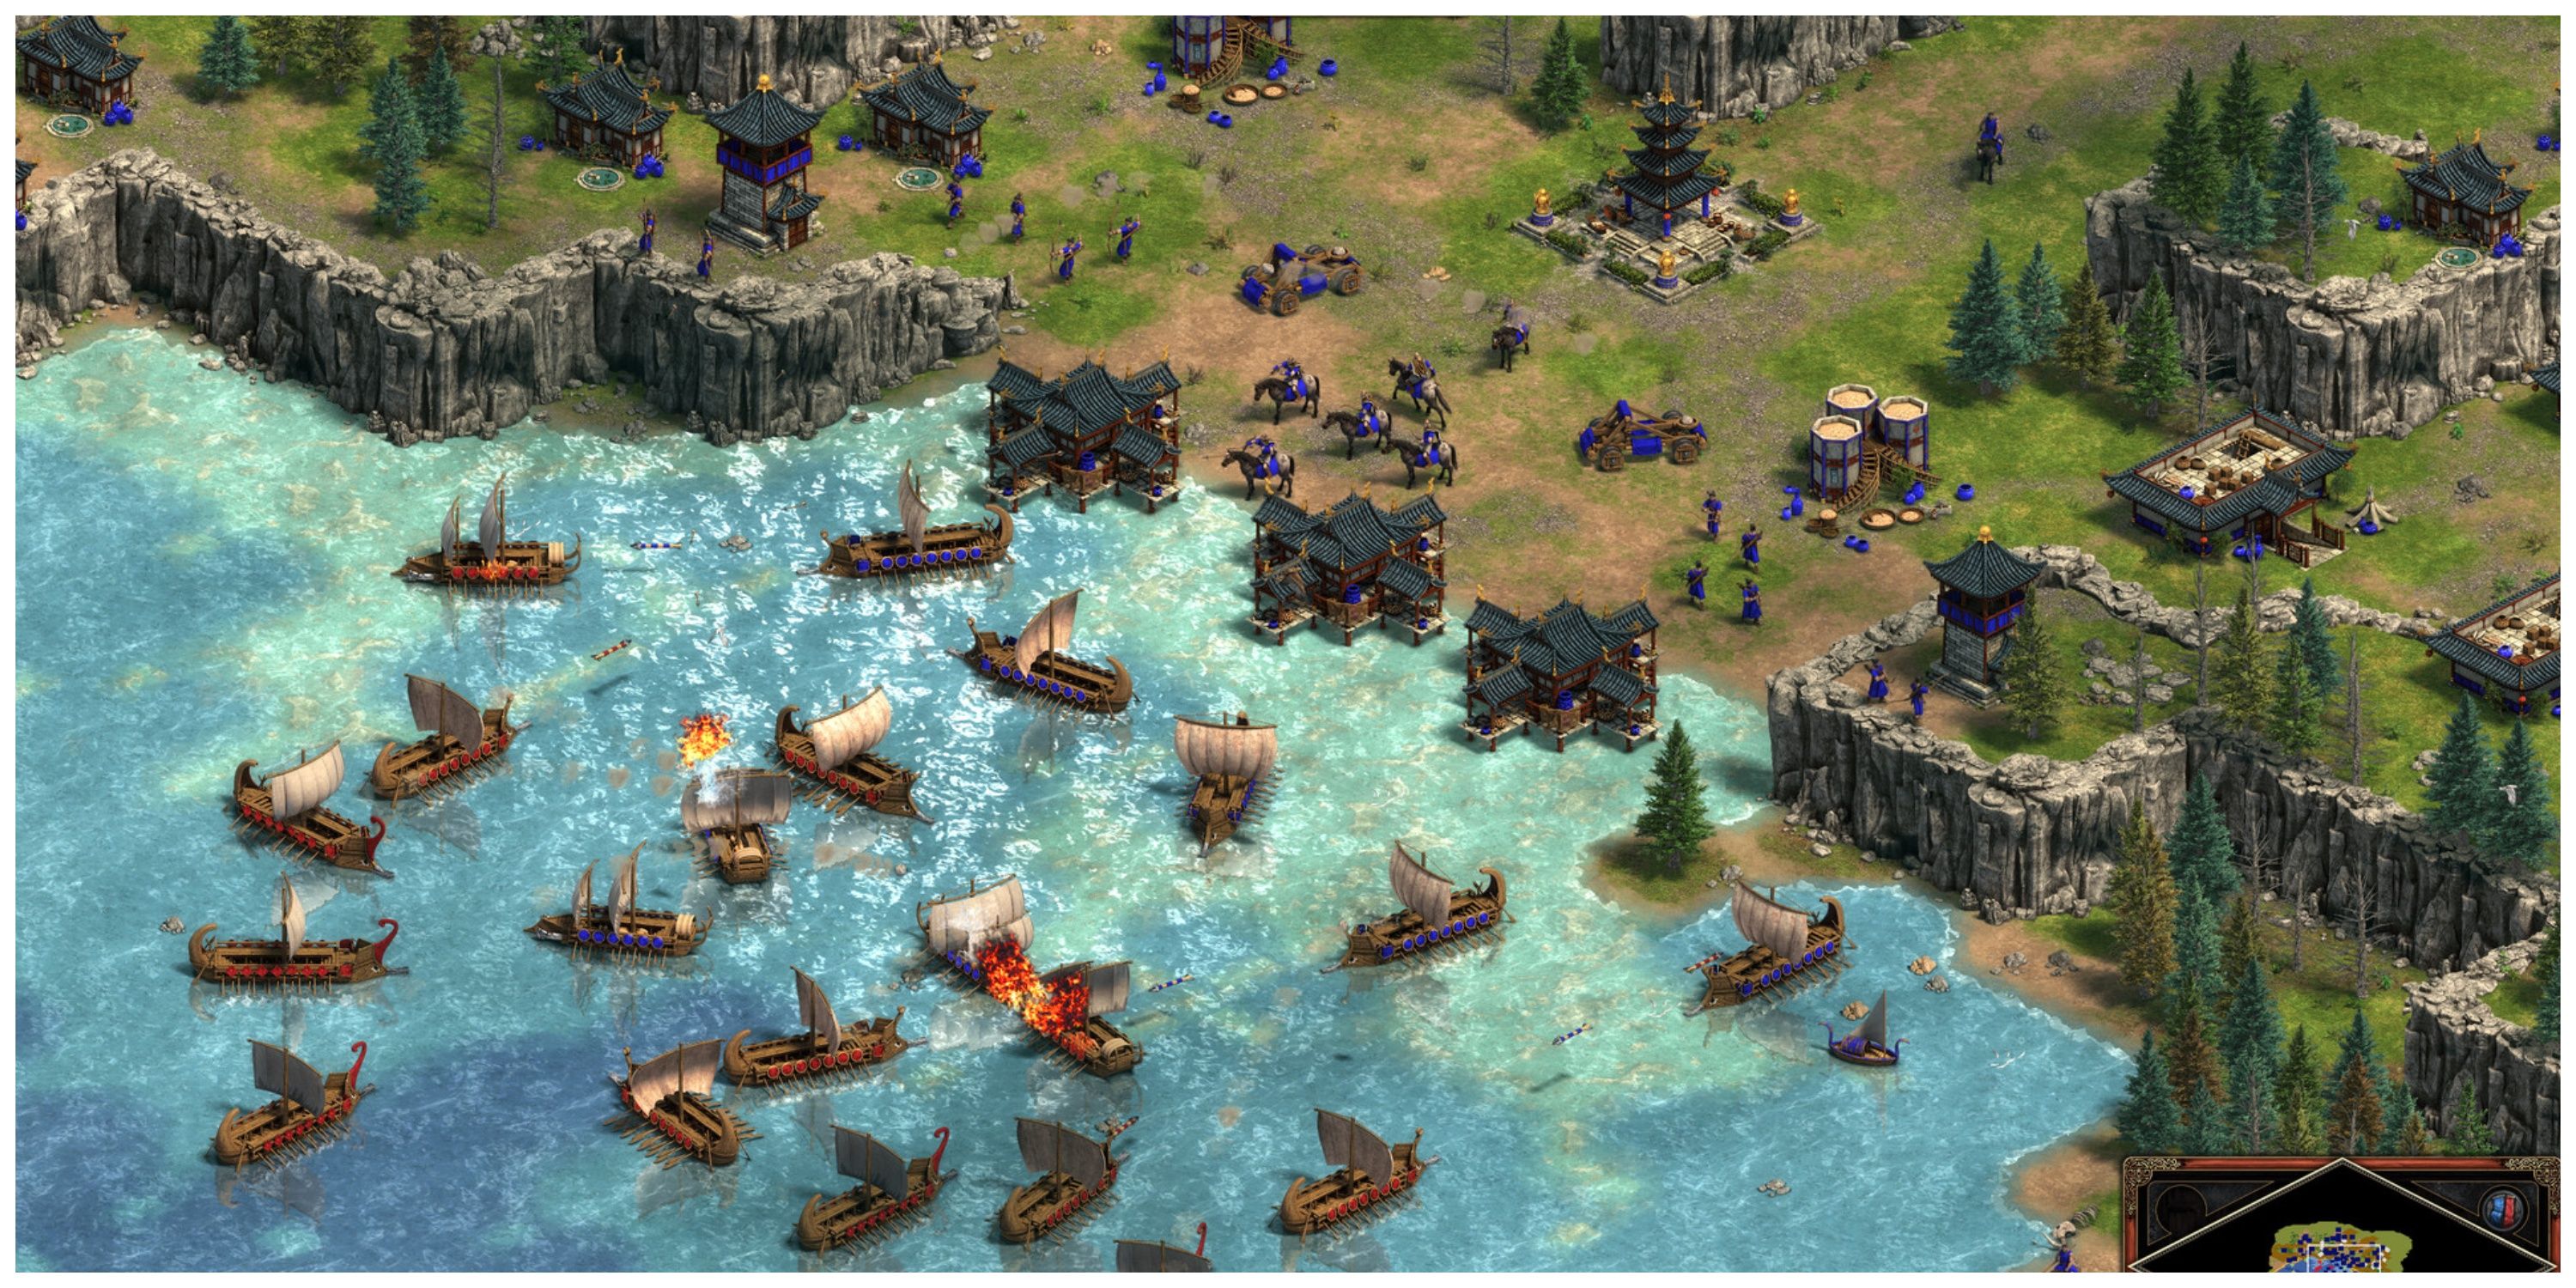 Age Of Empires - Steam Screenshot (Boats Burning In The Water)